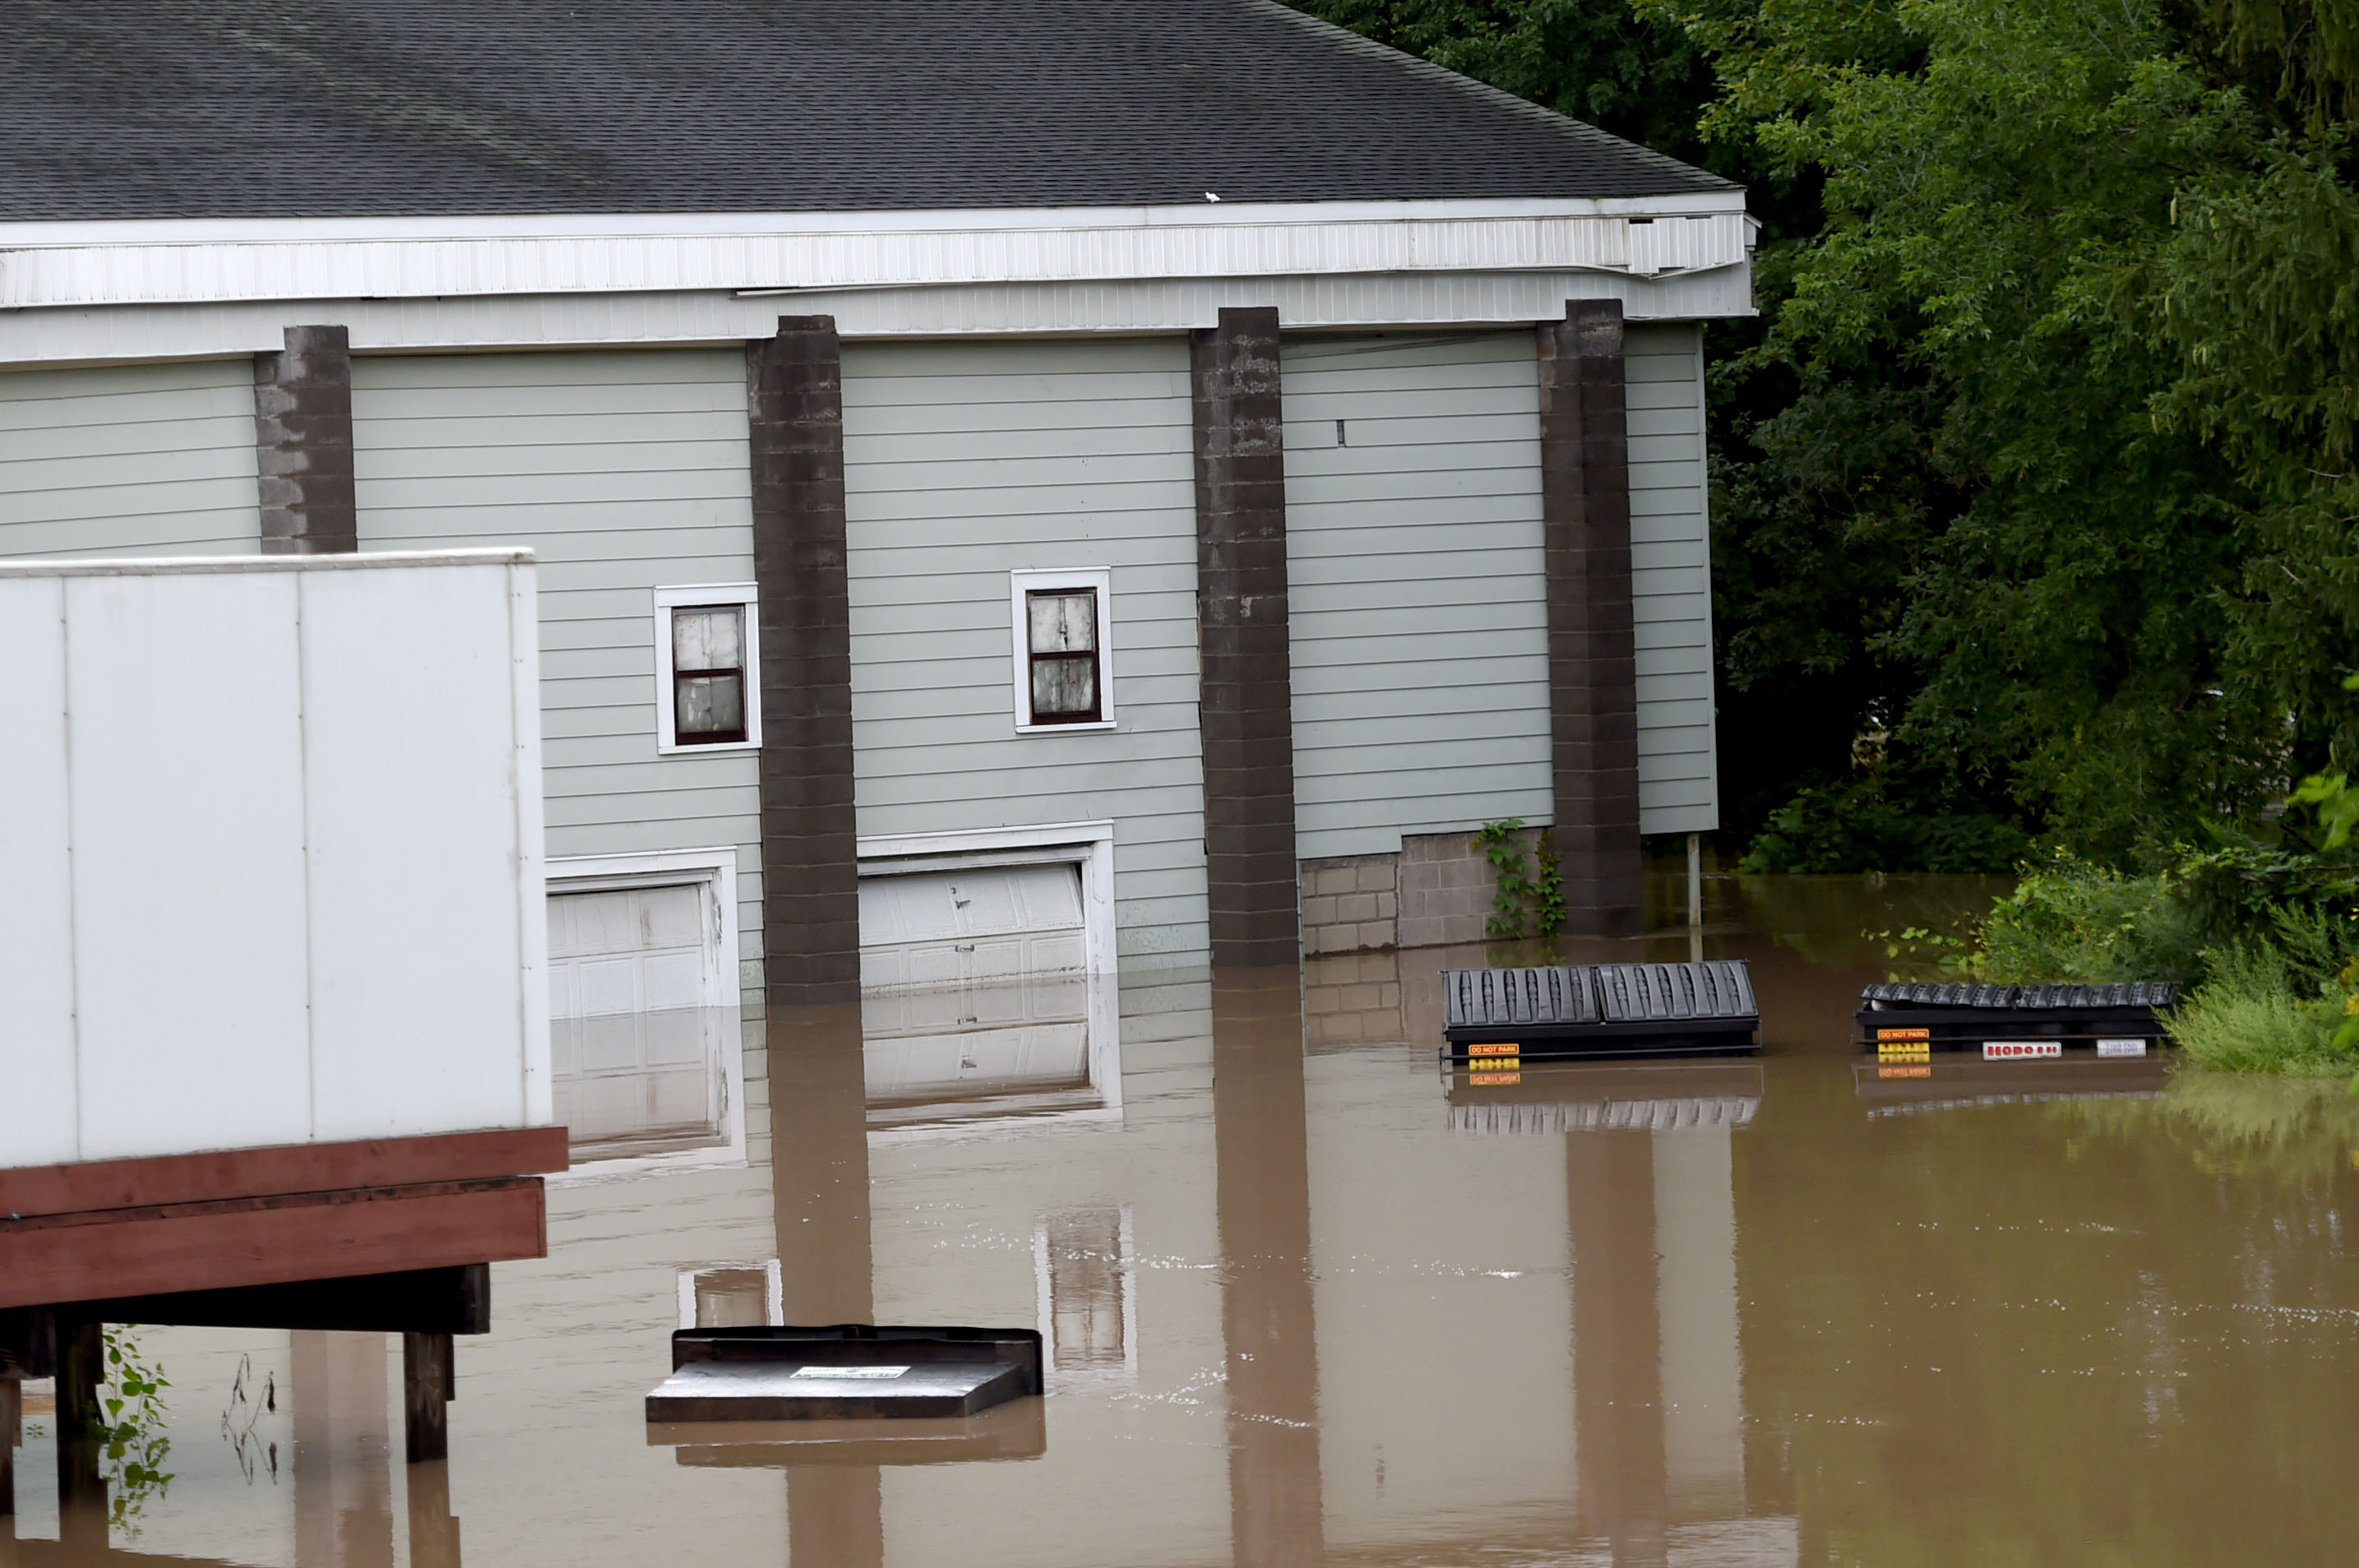 Flooding from Ninemile Creek nearly tops the dumpsters at a restaurant on Newport Road in Camillus August 19, 2021. Heavy rains again created flooding in Central New York with much of the flooding occurring along Ninemile Creek in Camillus and Marcellus. Dennis Nett | dnett@syracuse.com